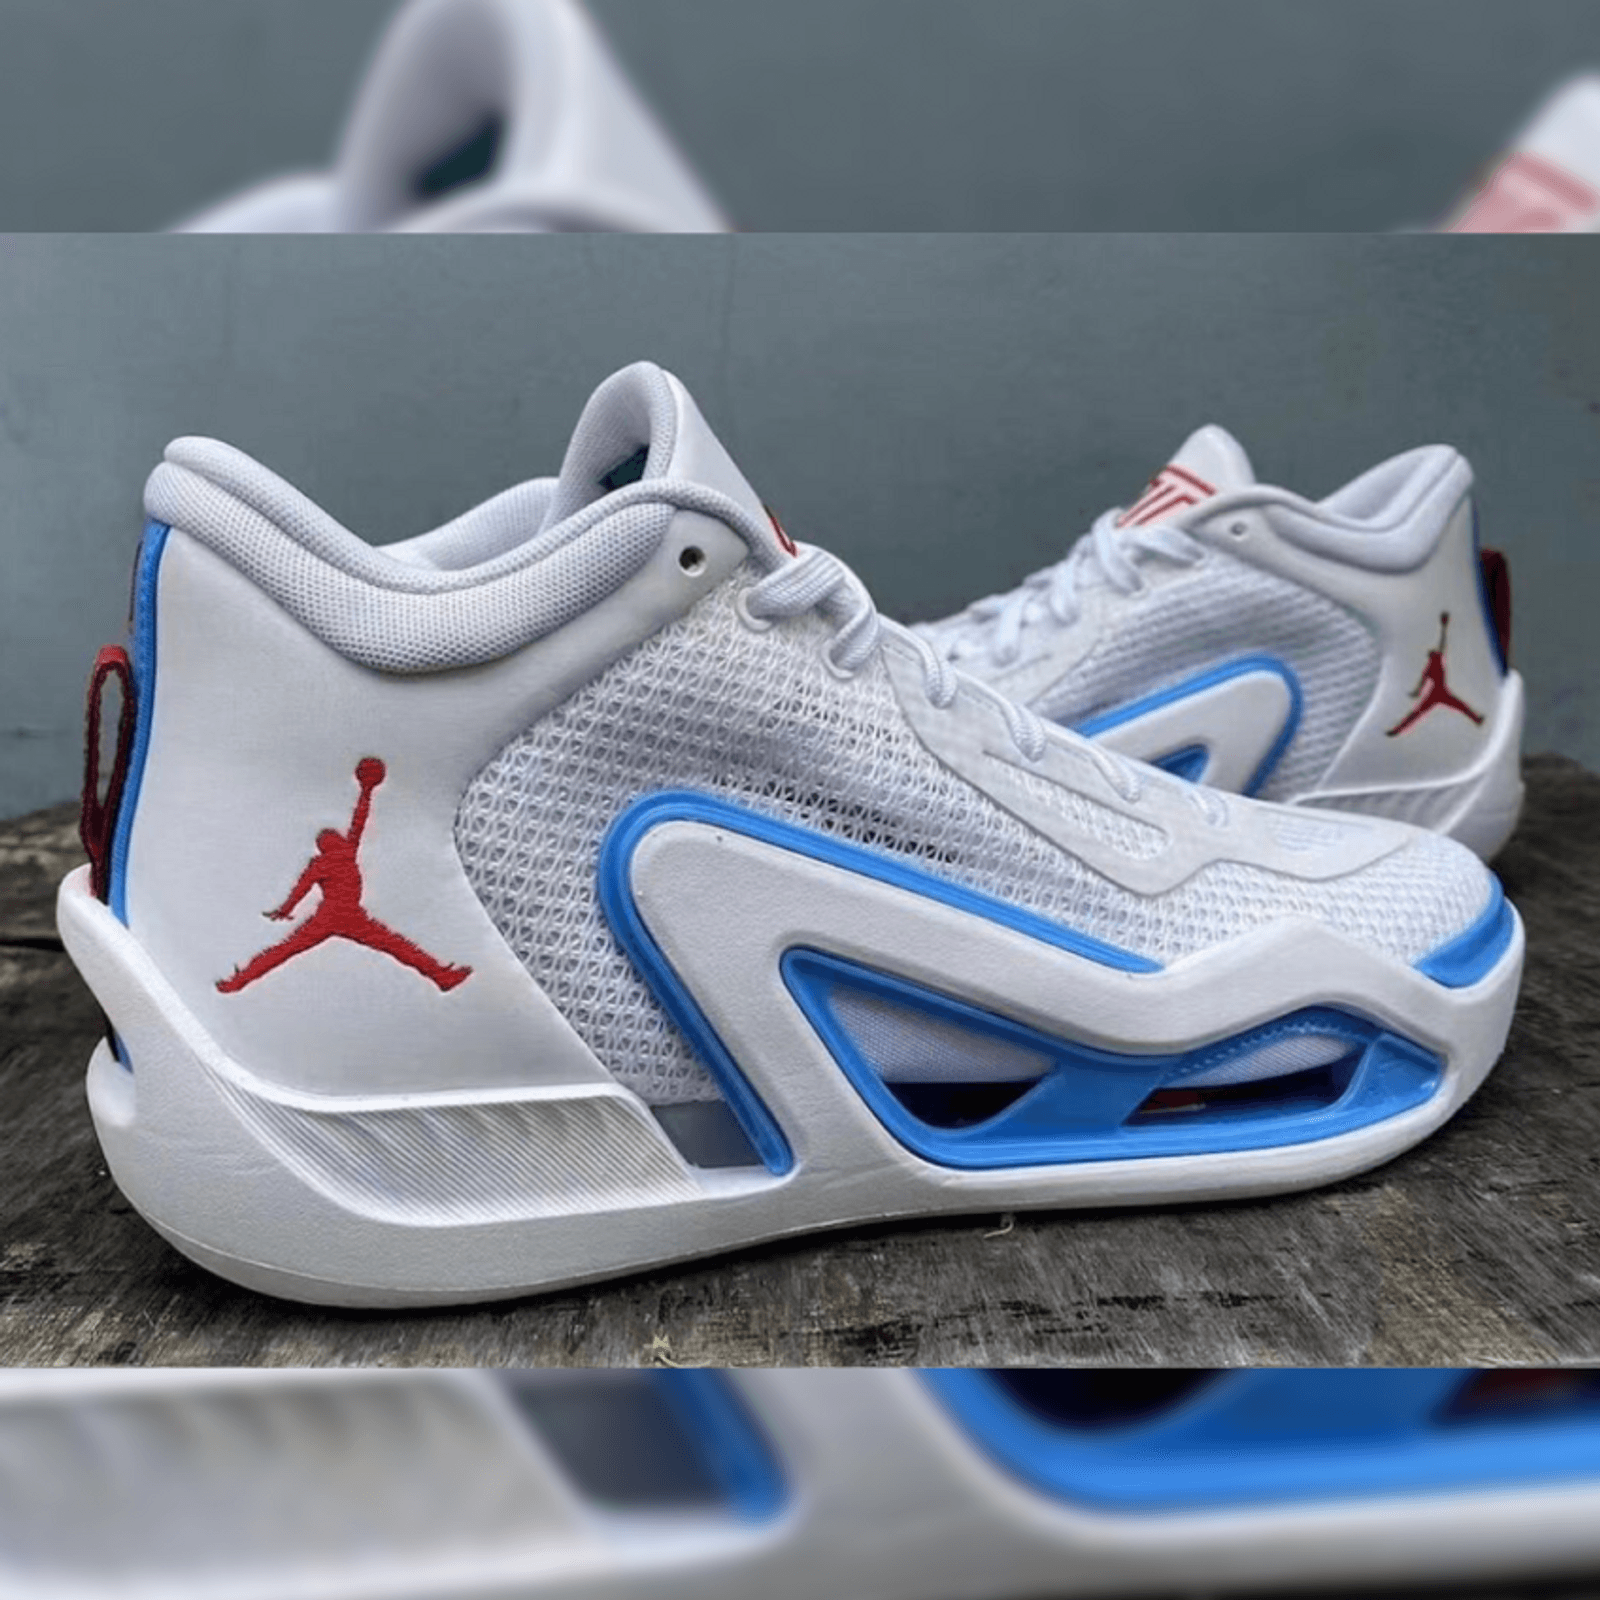 JAYSON TATUM'S FIRST SIGNATURE SHOES ON THE WAY